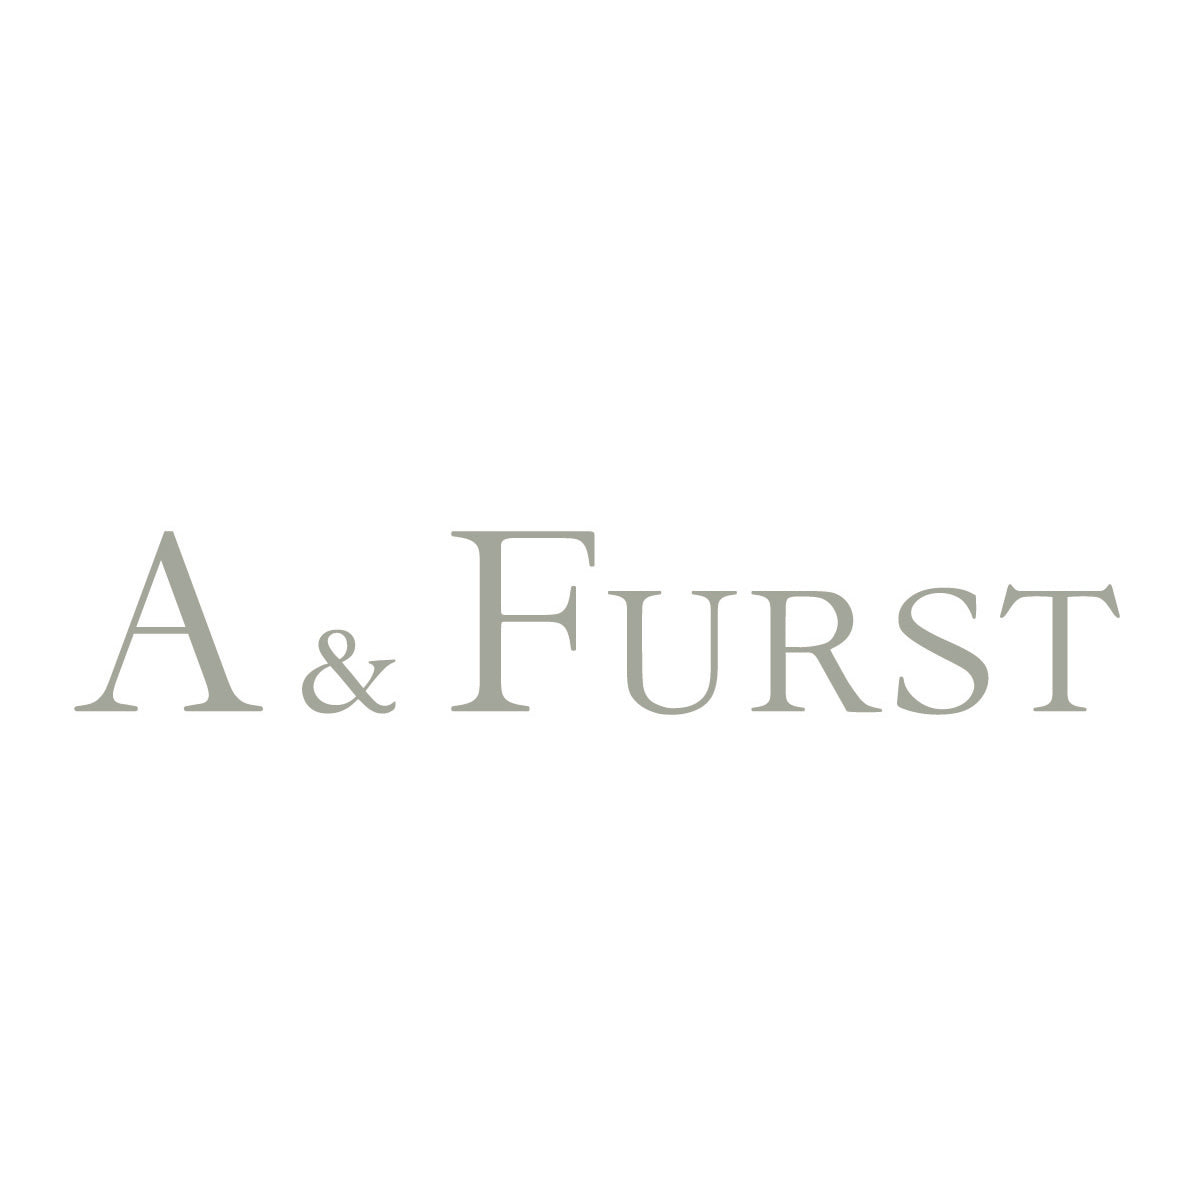 NEW! - A & Furst - Sole - Drop Earrings with White Agate and Citrine, 18k Yellow Gold